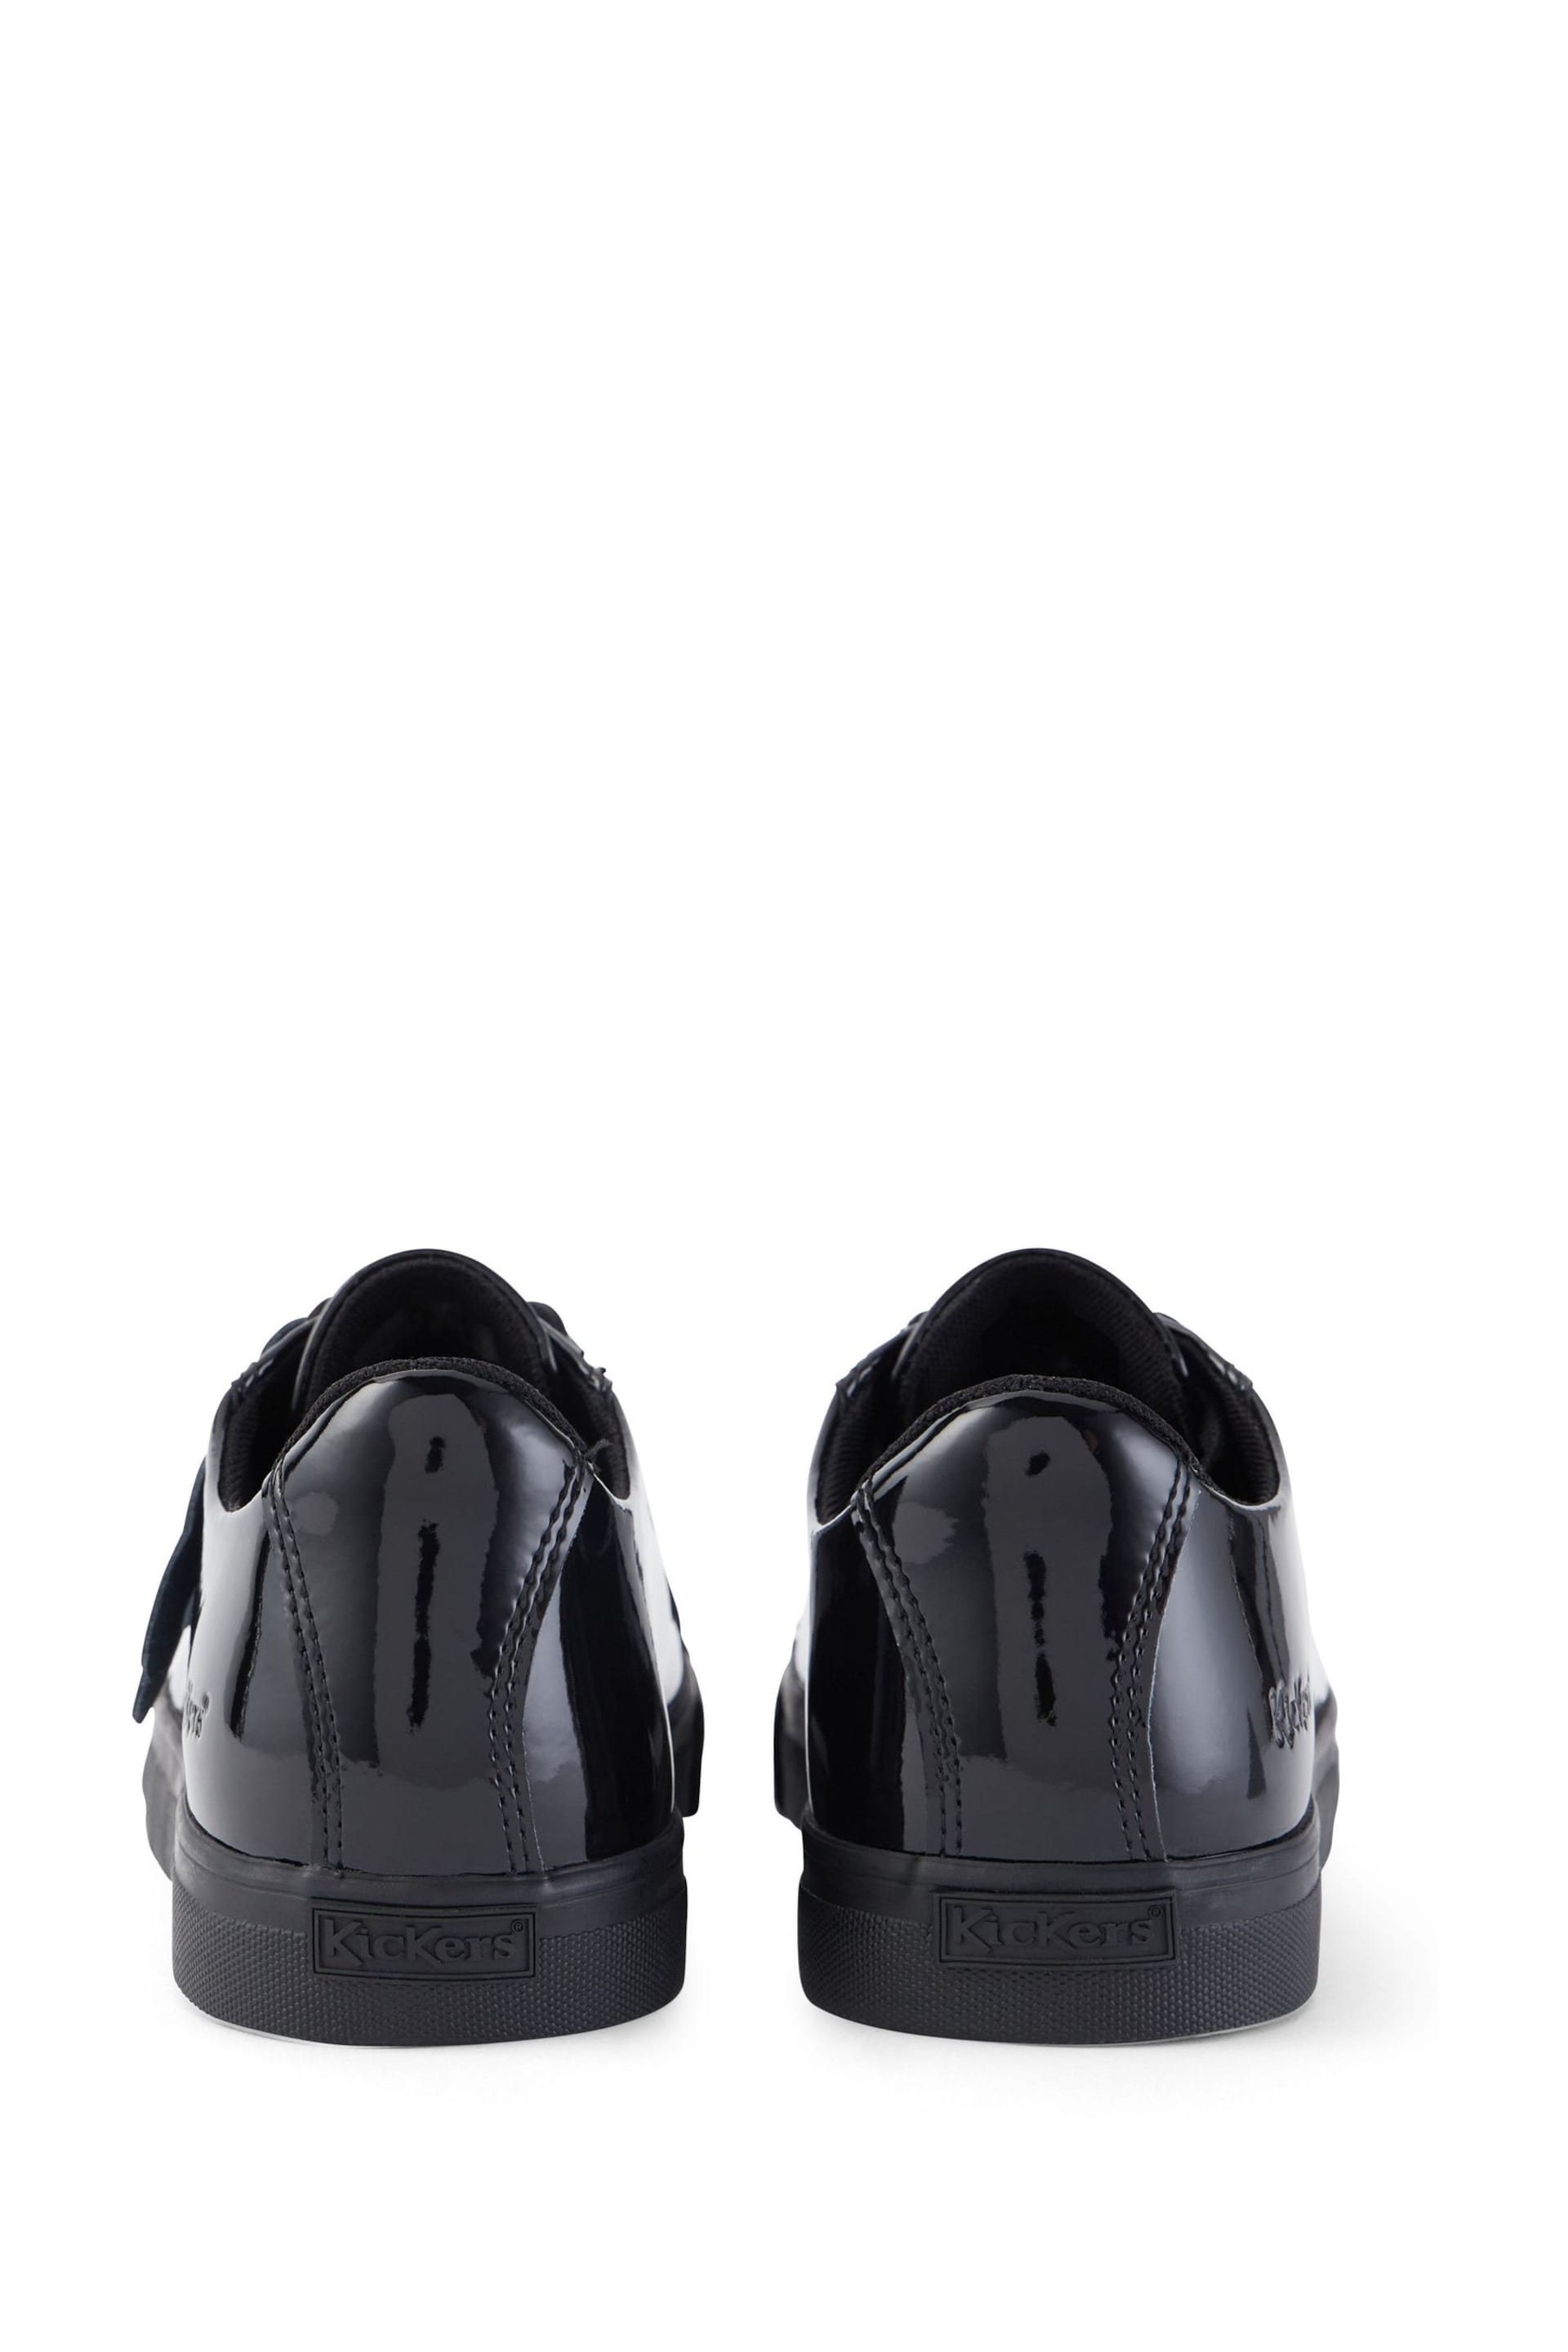 Kickers Black Tovni Lacer Shoes - Image 5 of 8